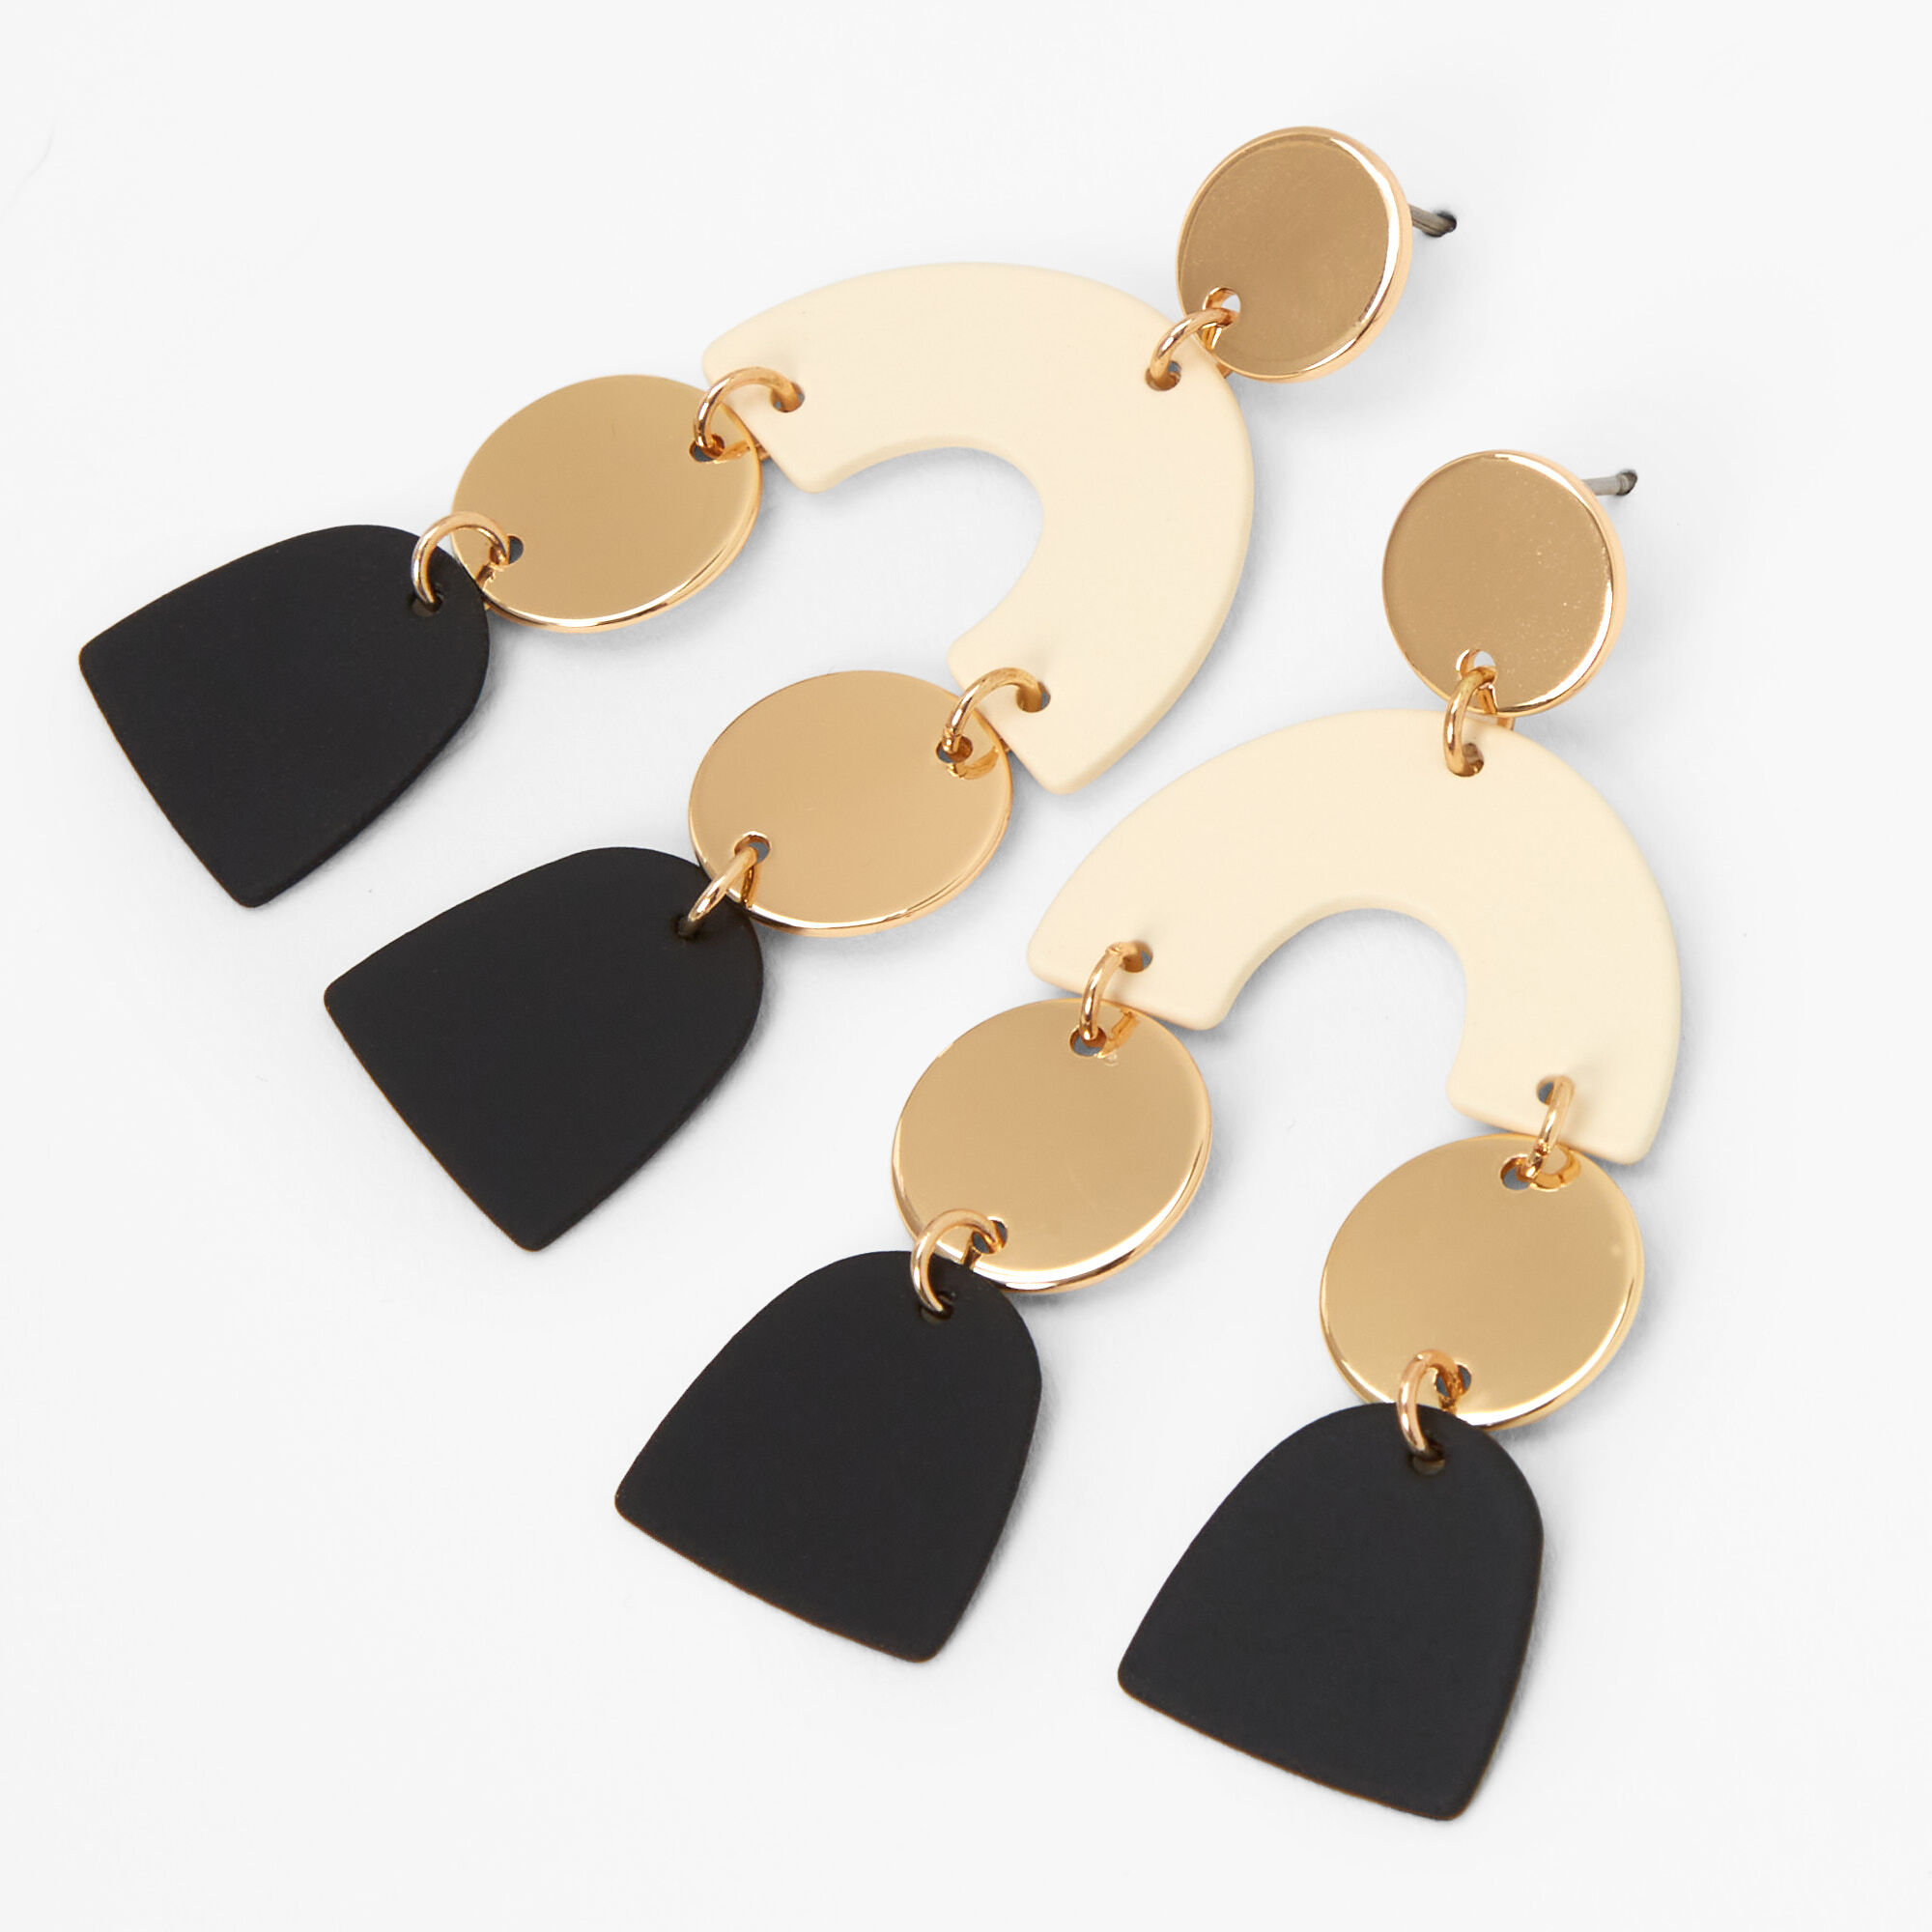 View Claires 2 Neutral Geometric Drop Earrings Gold information